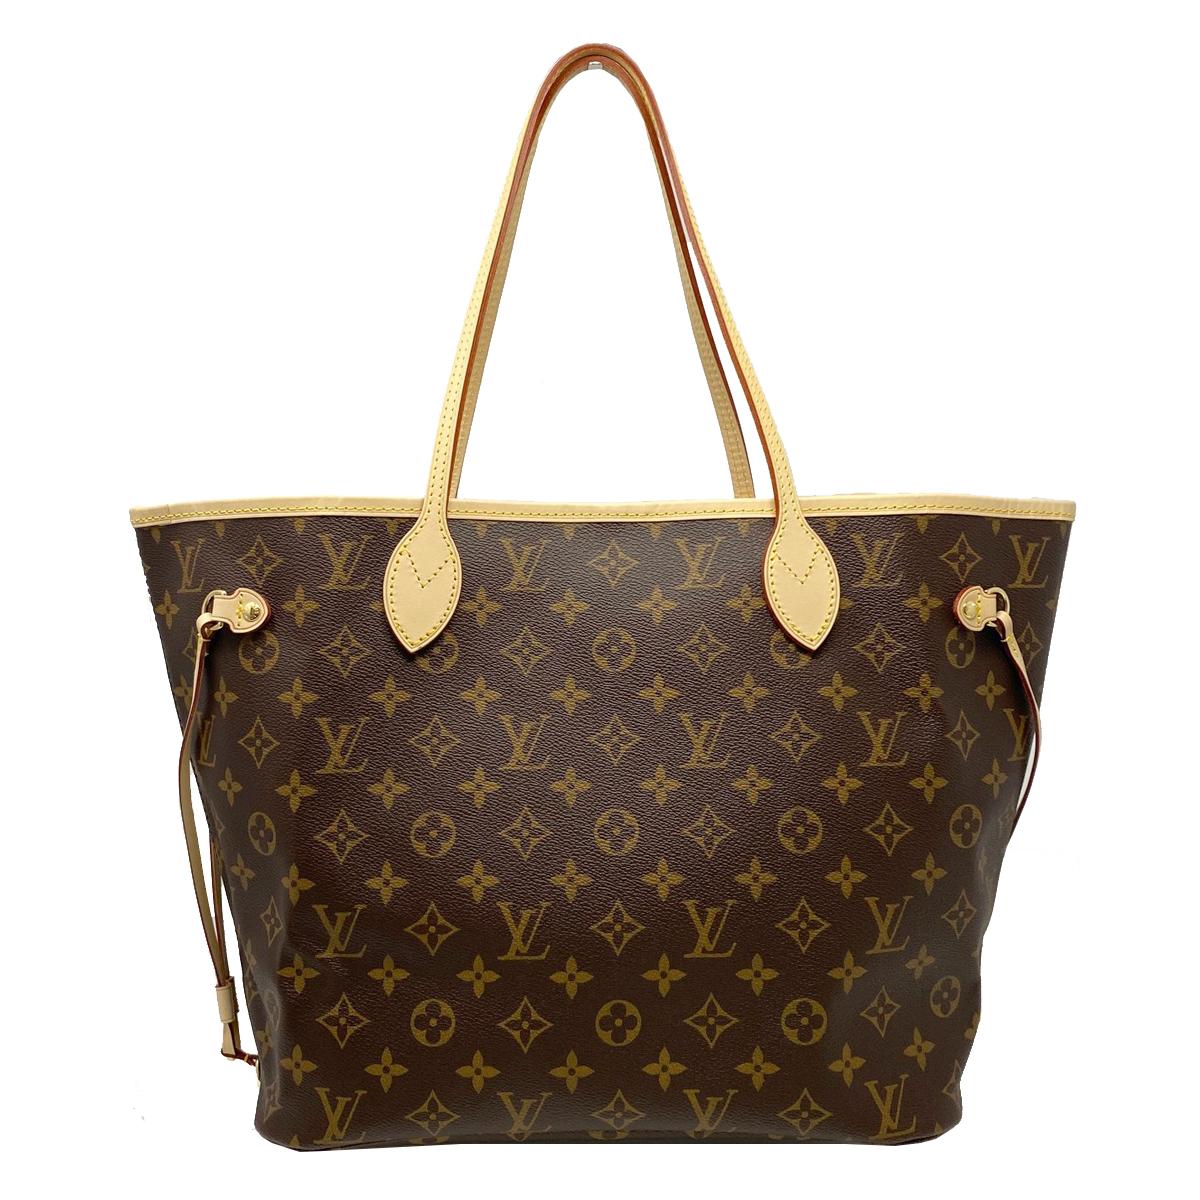 Company-Louis Vuitton
Model-Neverfull MM Cherry Monogram Leather Canvas Tote
Color-Brown 
Date Code-SD4240
Material-Monogram Leather Canvas
Measurements-11.25